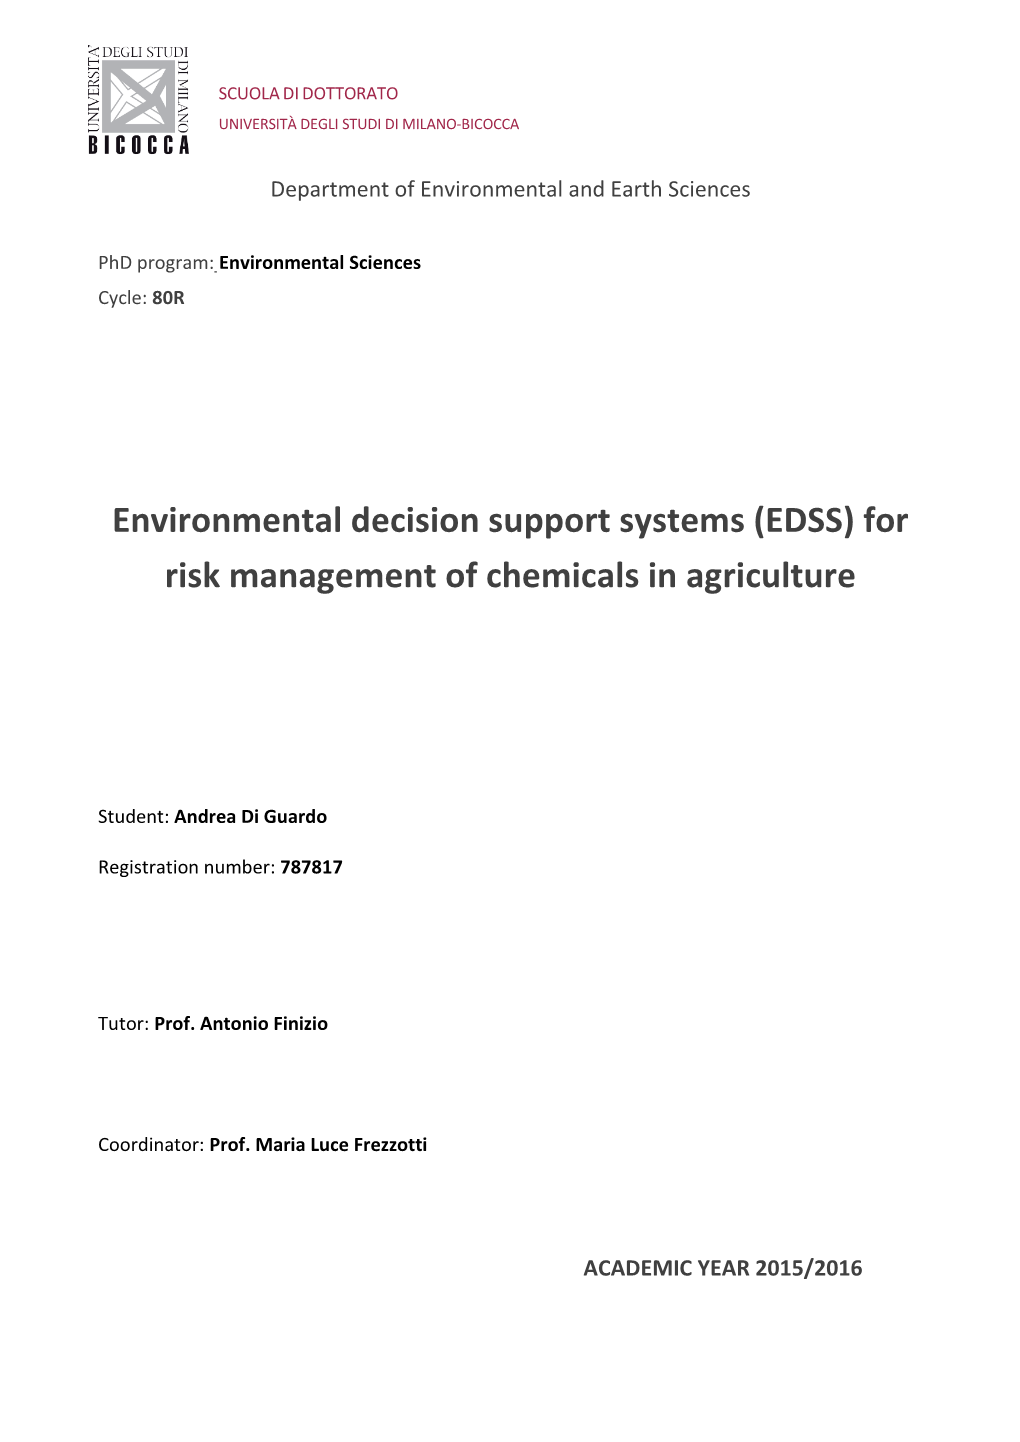 Environmental Decision Support Systems (EDSS) for Risk Management of Chemicals in Agriculture